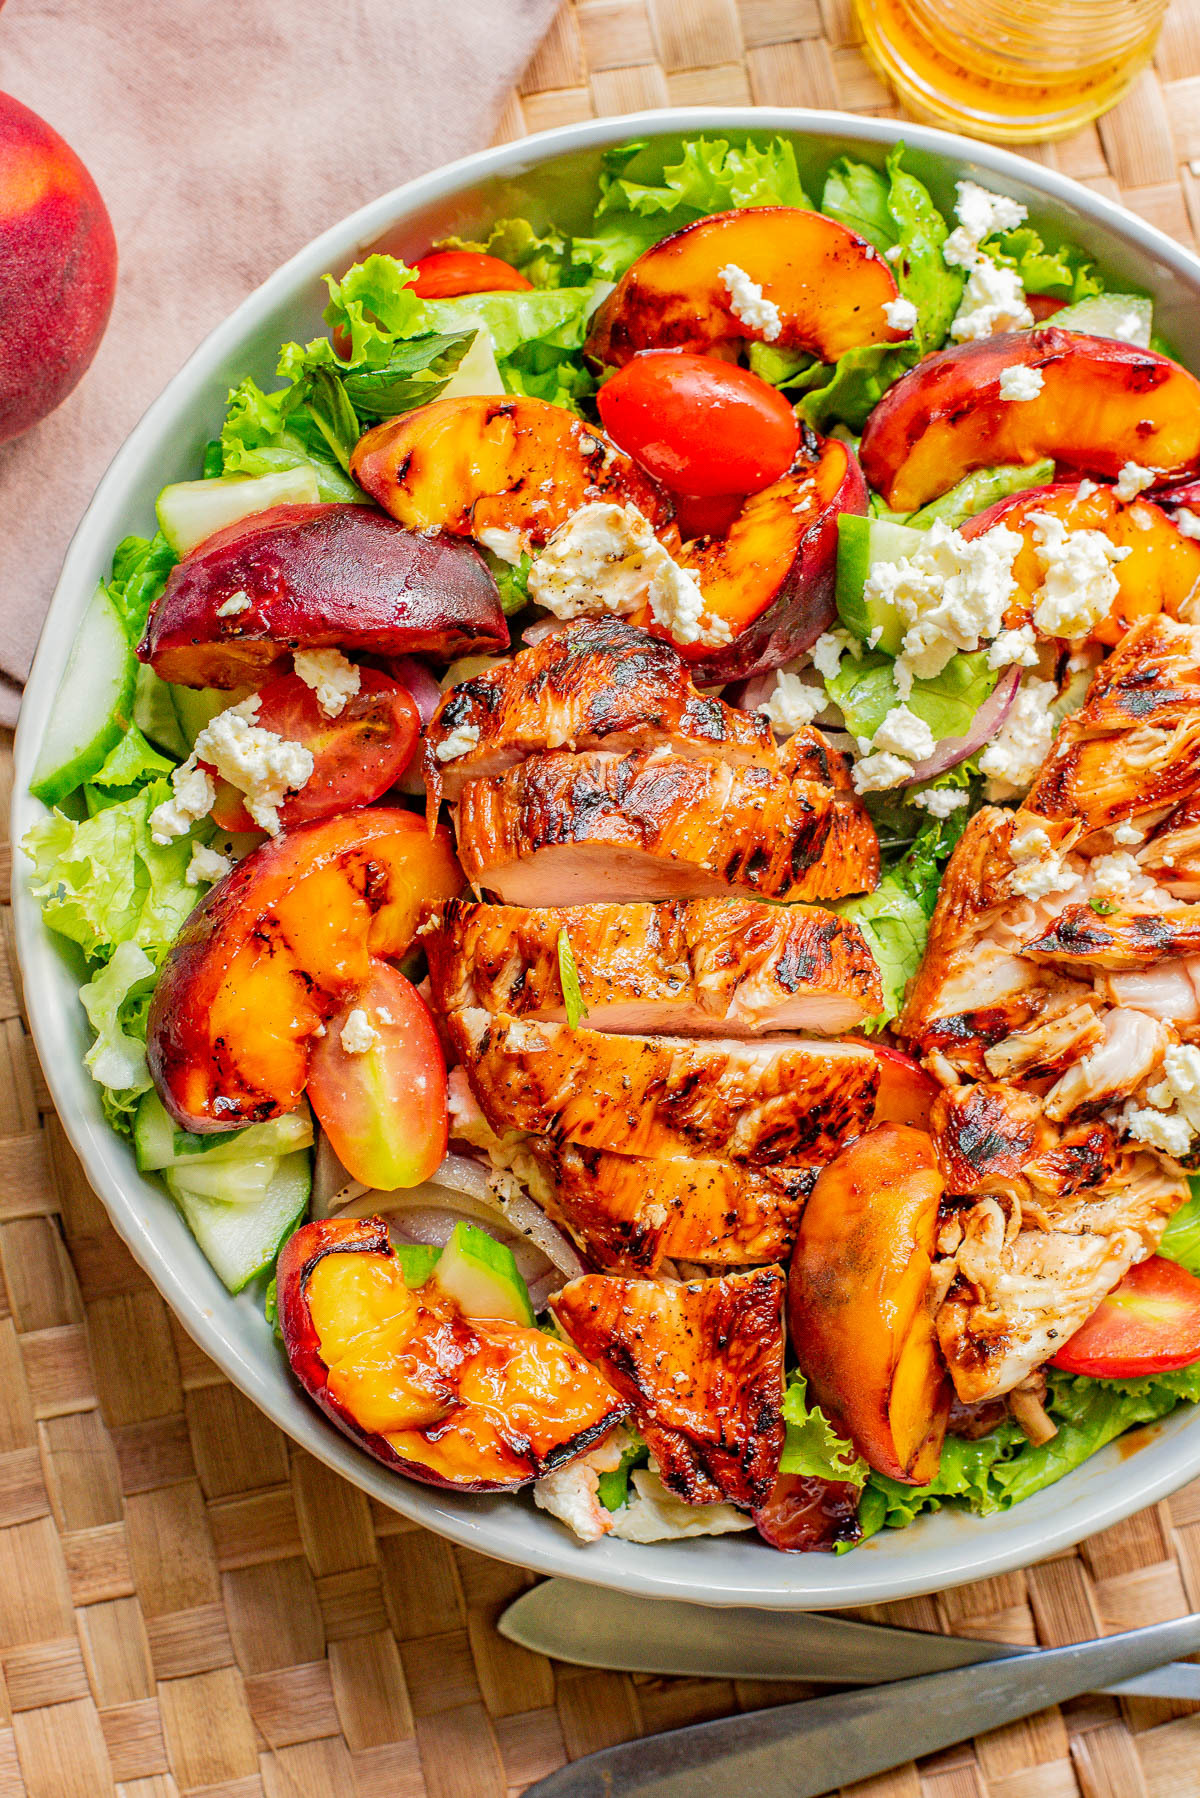 A bowl of salad featuring grilled chicken breast, peach slices, tomatoes, lettuce, and crumbled feta cheese, placed on a woven mat. A whole peach and a partial view of a glass bottle are in the background.